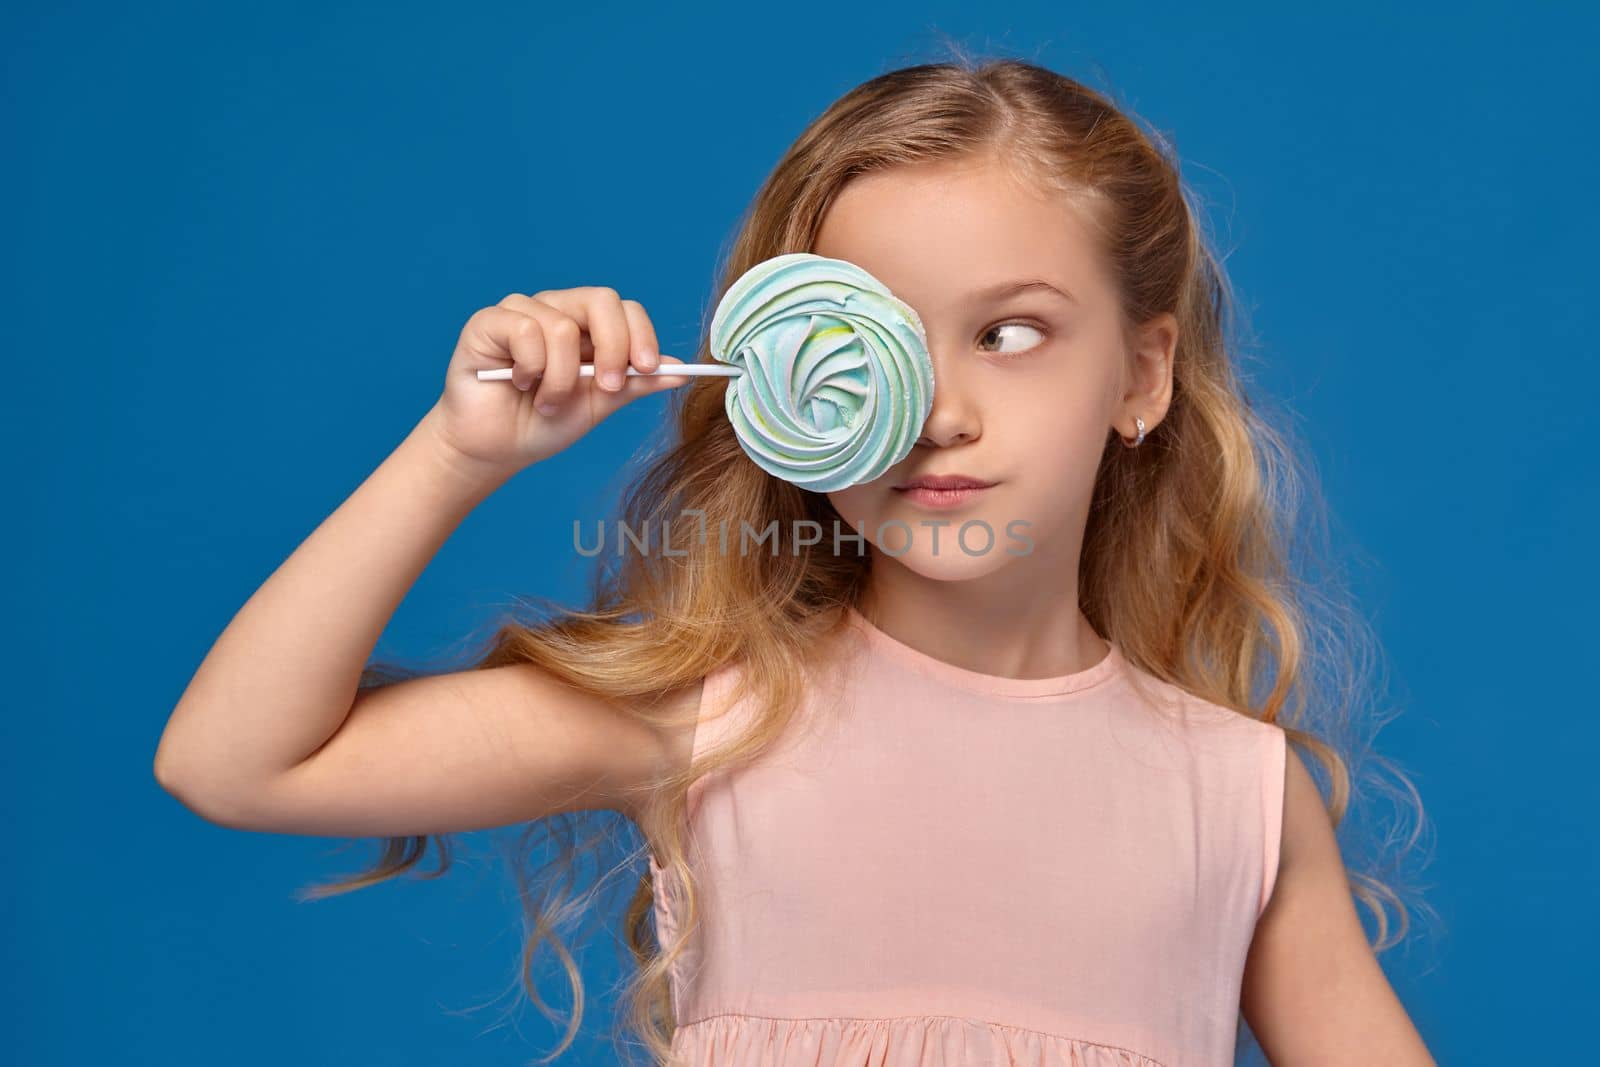 Pretty little girl in a pink dress closes her eye with a candy and looks away, standing on a blue background.